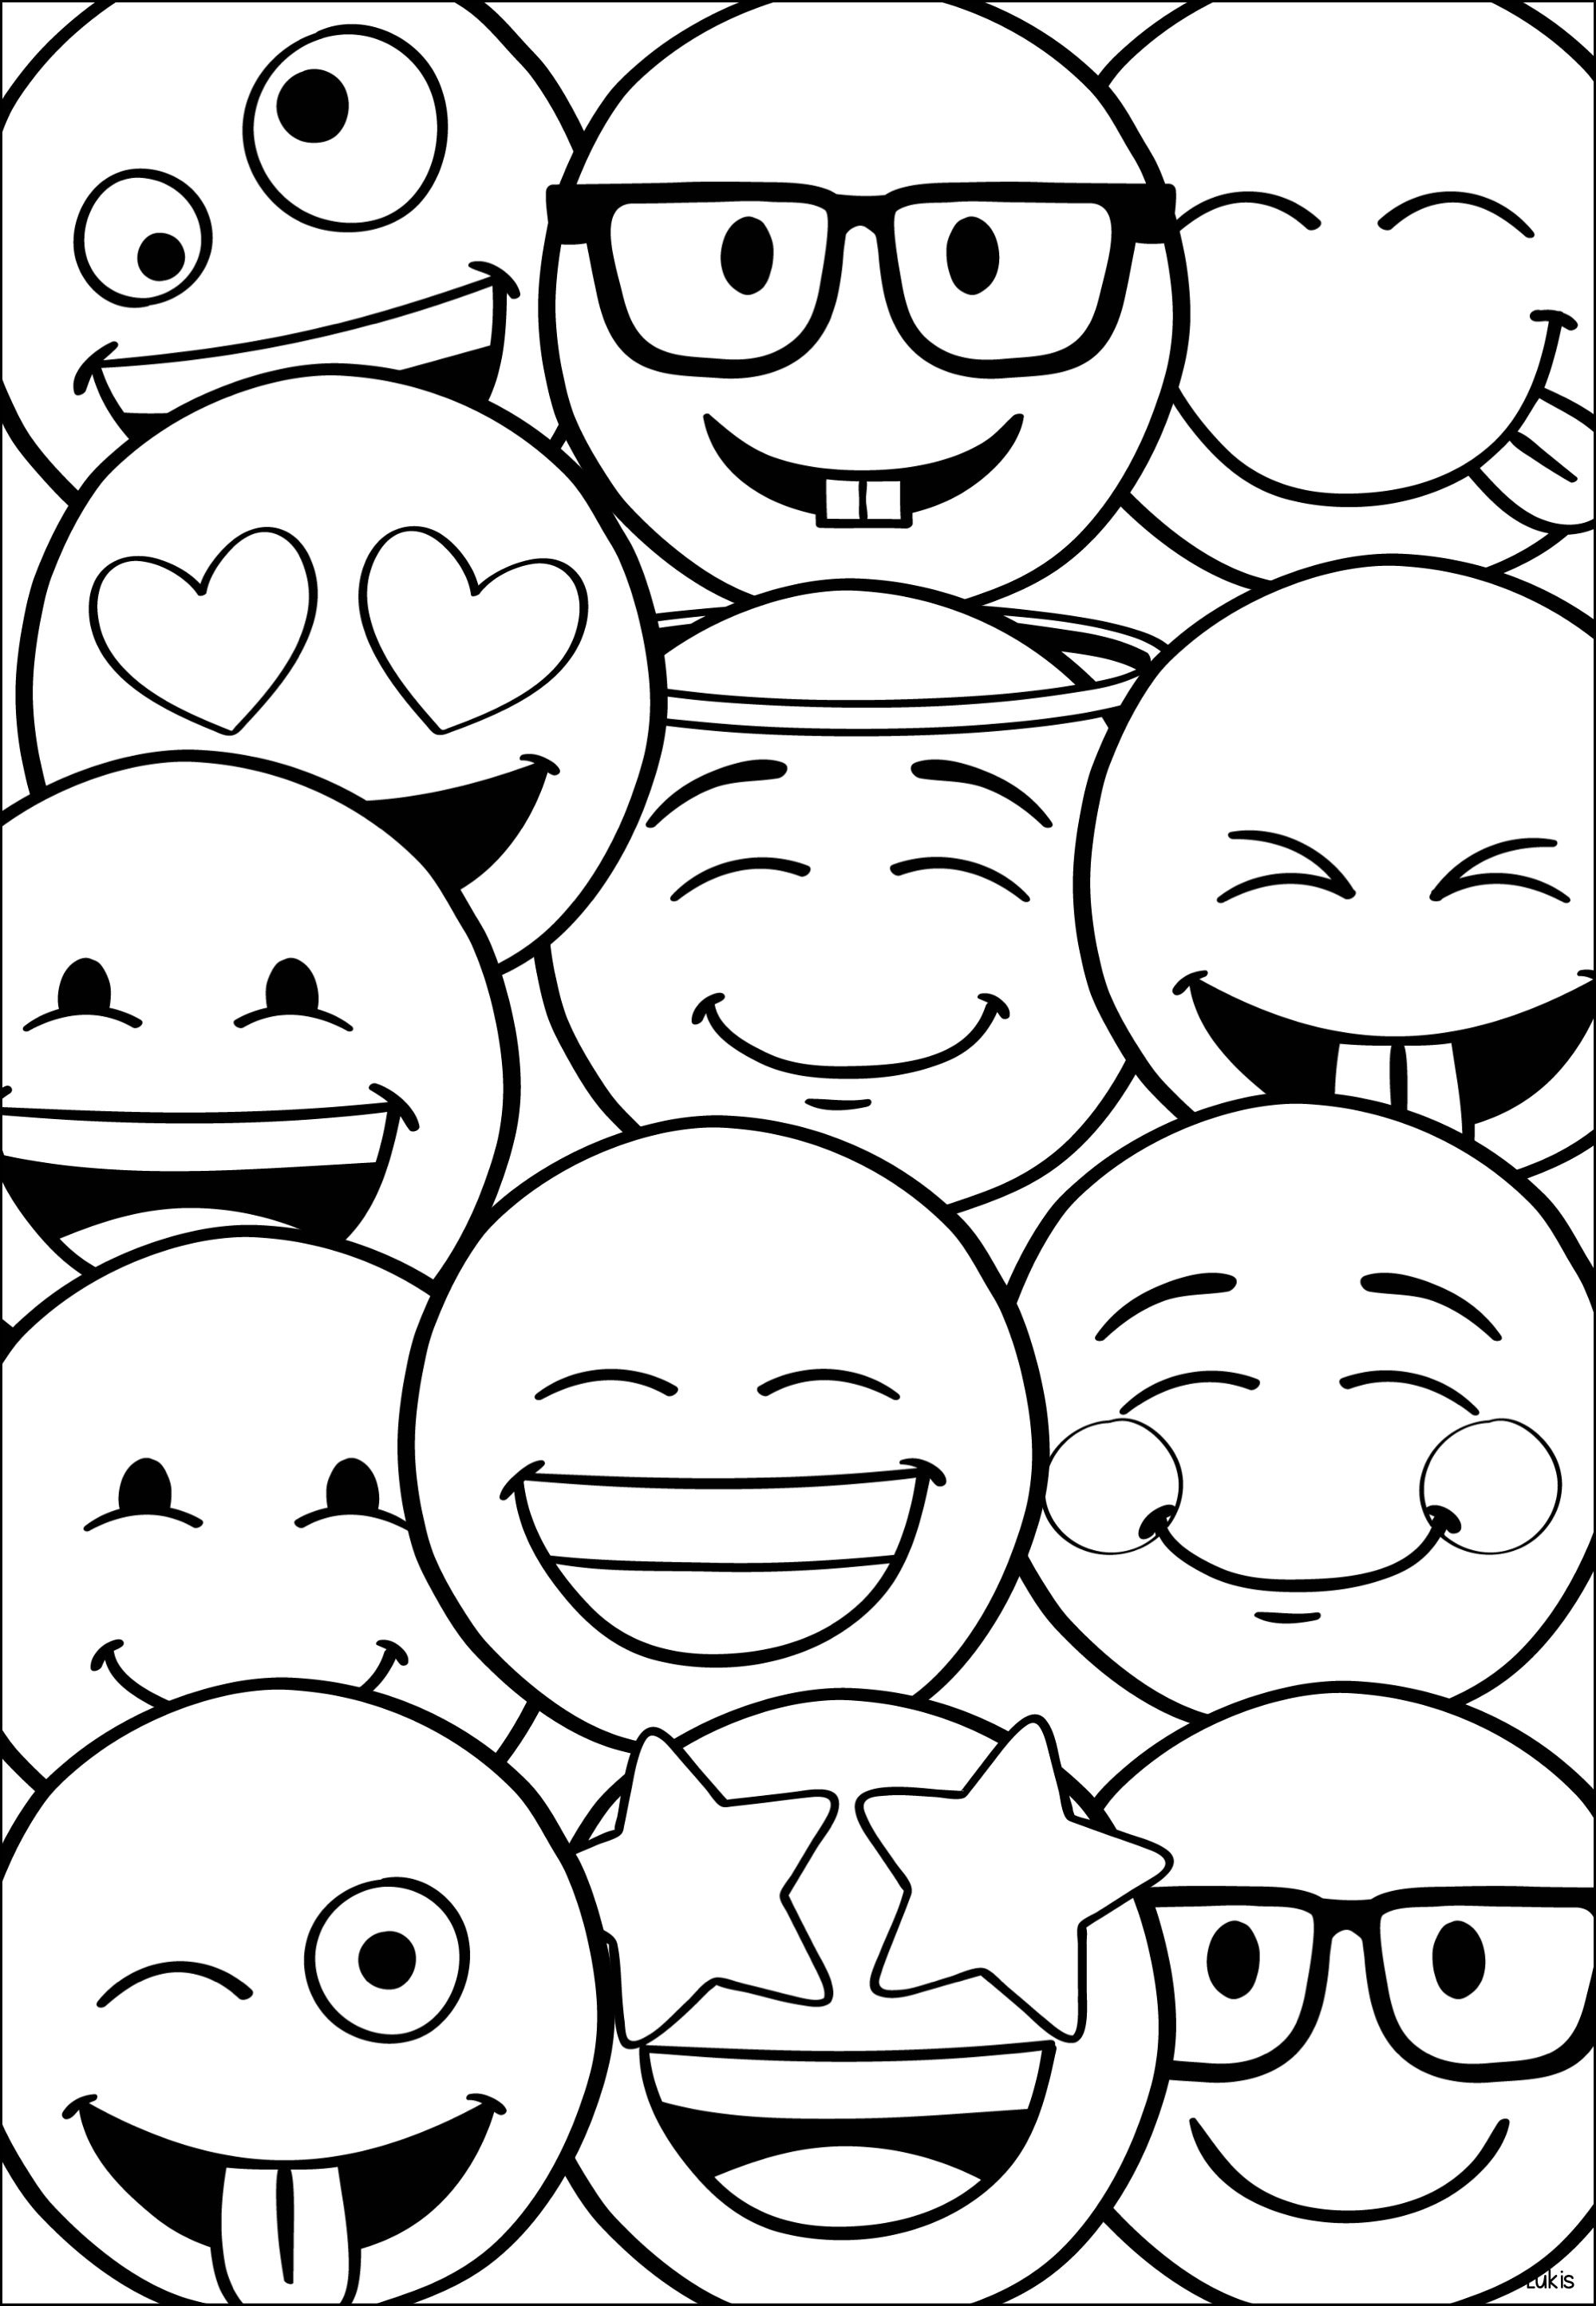 World smile day coloring pages printable pdf coloring sheets smiling face emojis fun art pictures for kids